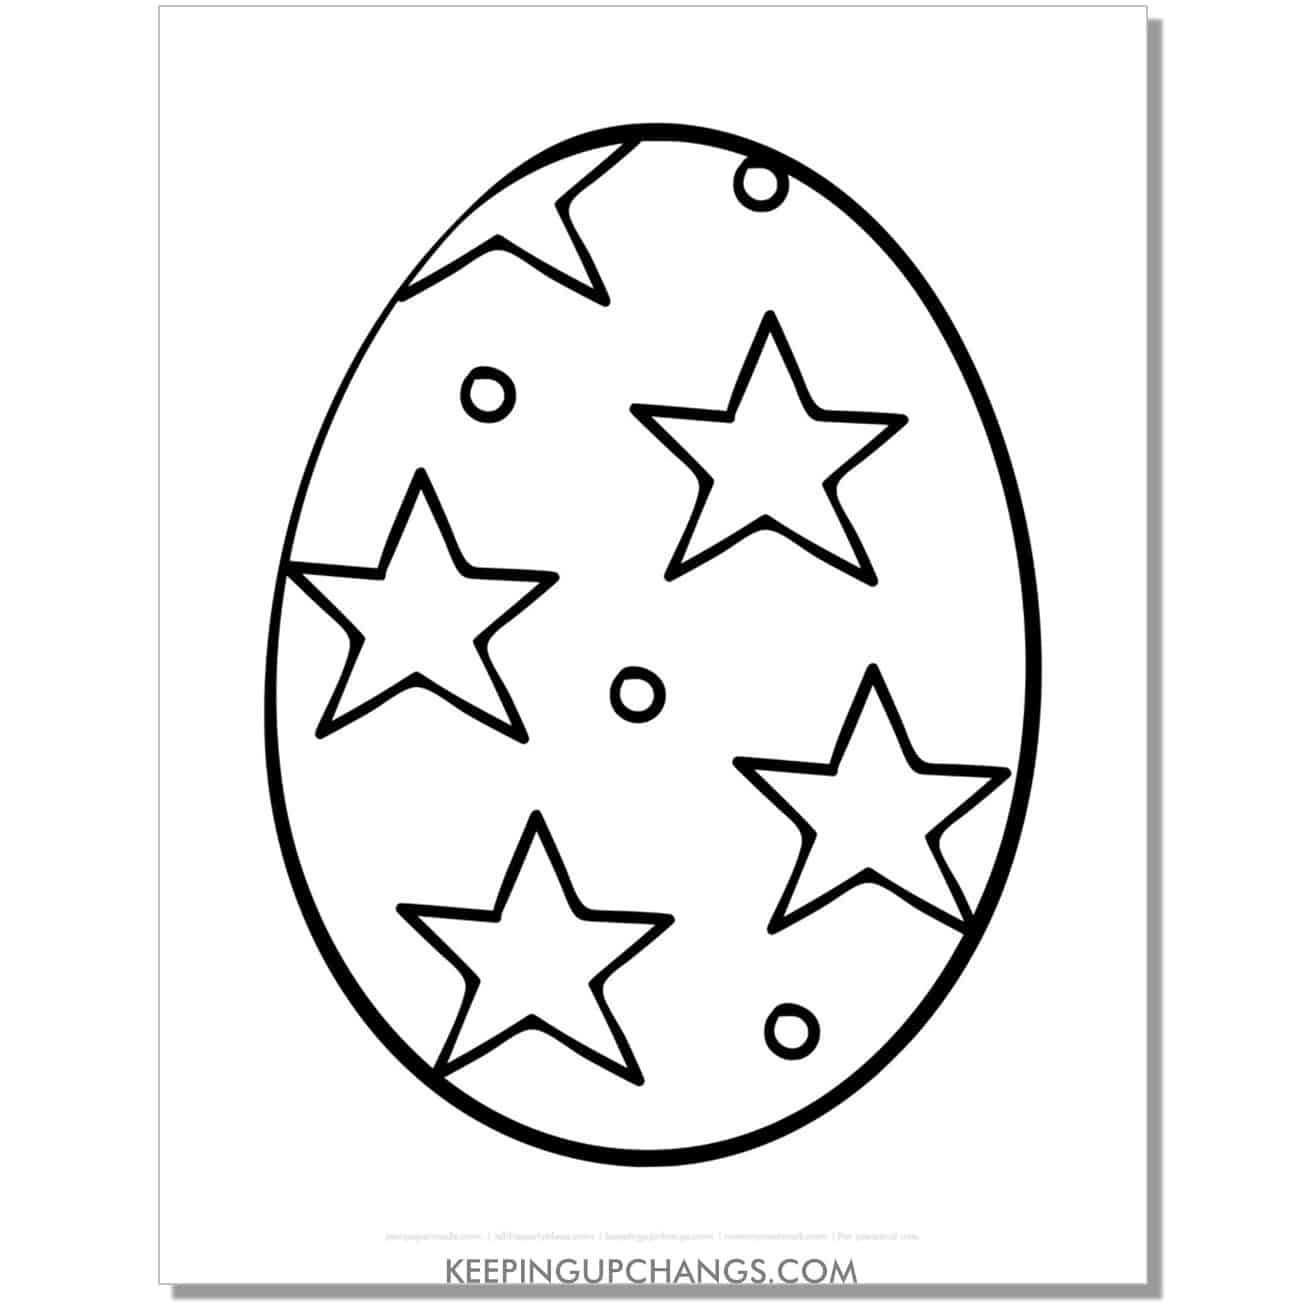 free large easter egg with stars, dots coloring page, sheet.